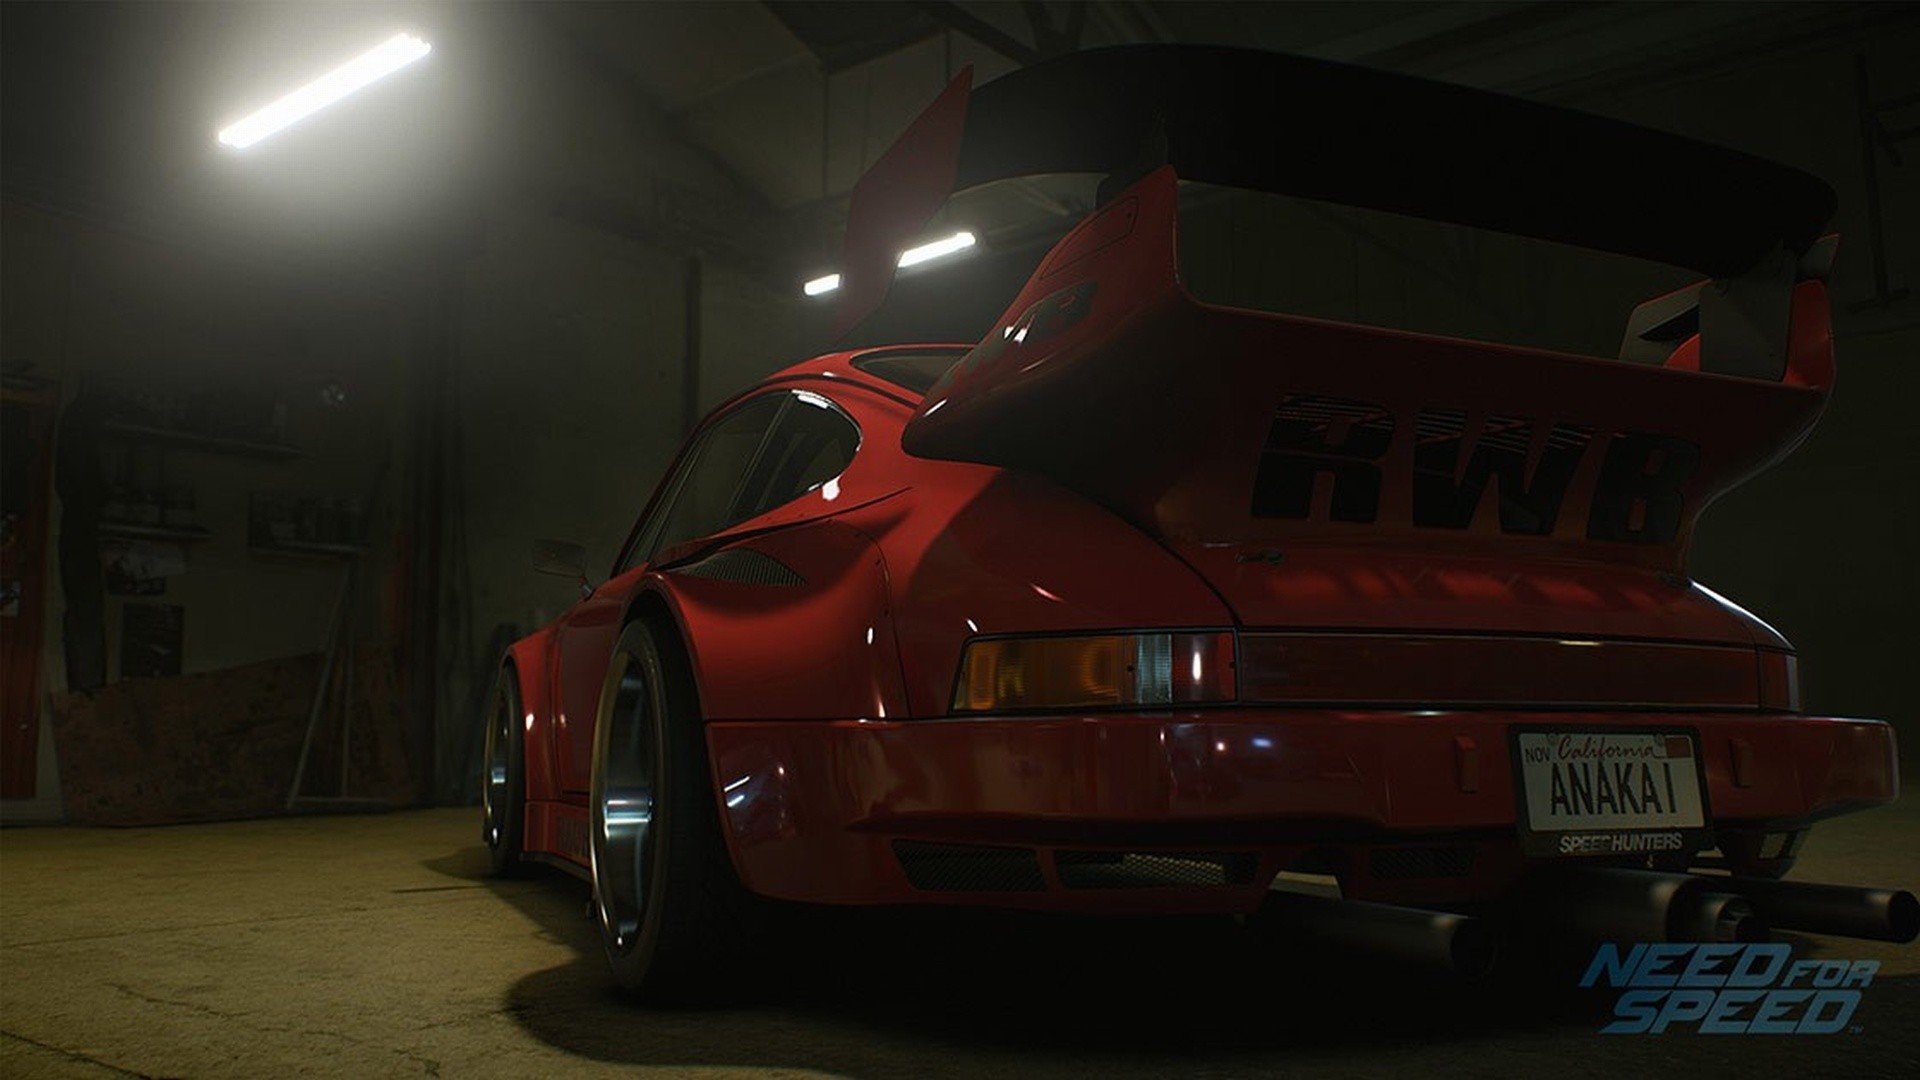 General 1920x1080 car vehicle red cars Need for Speed Porsche video games